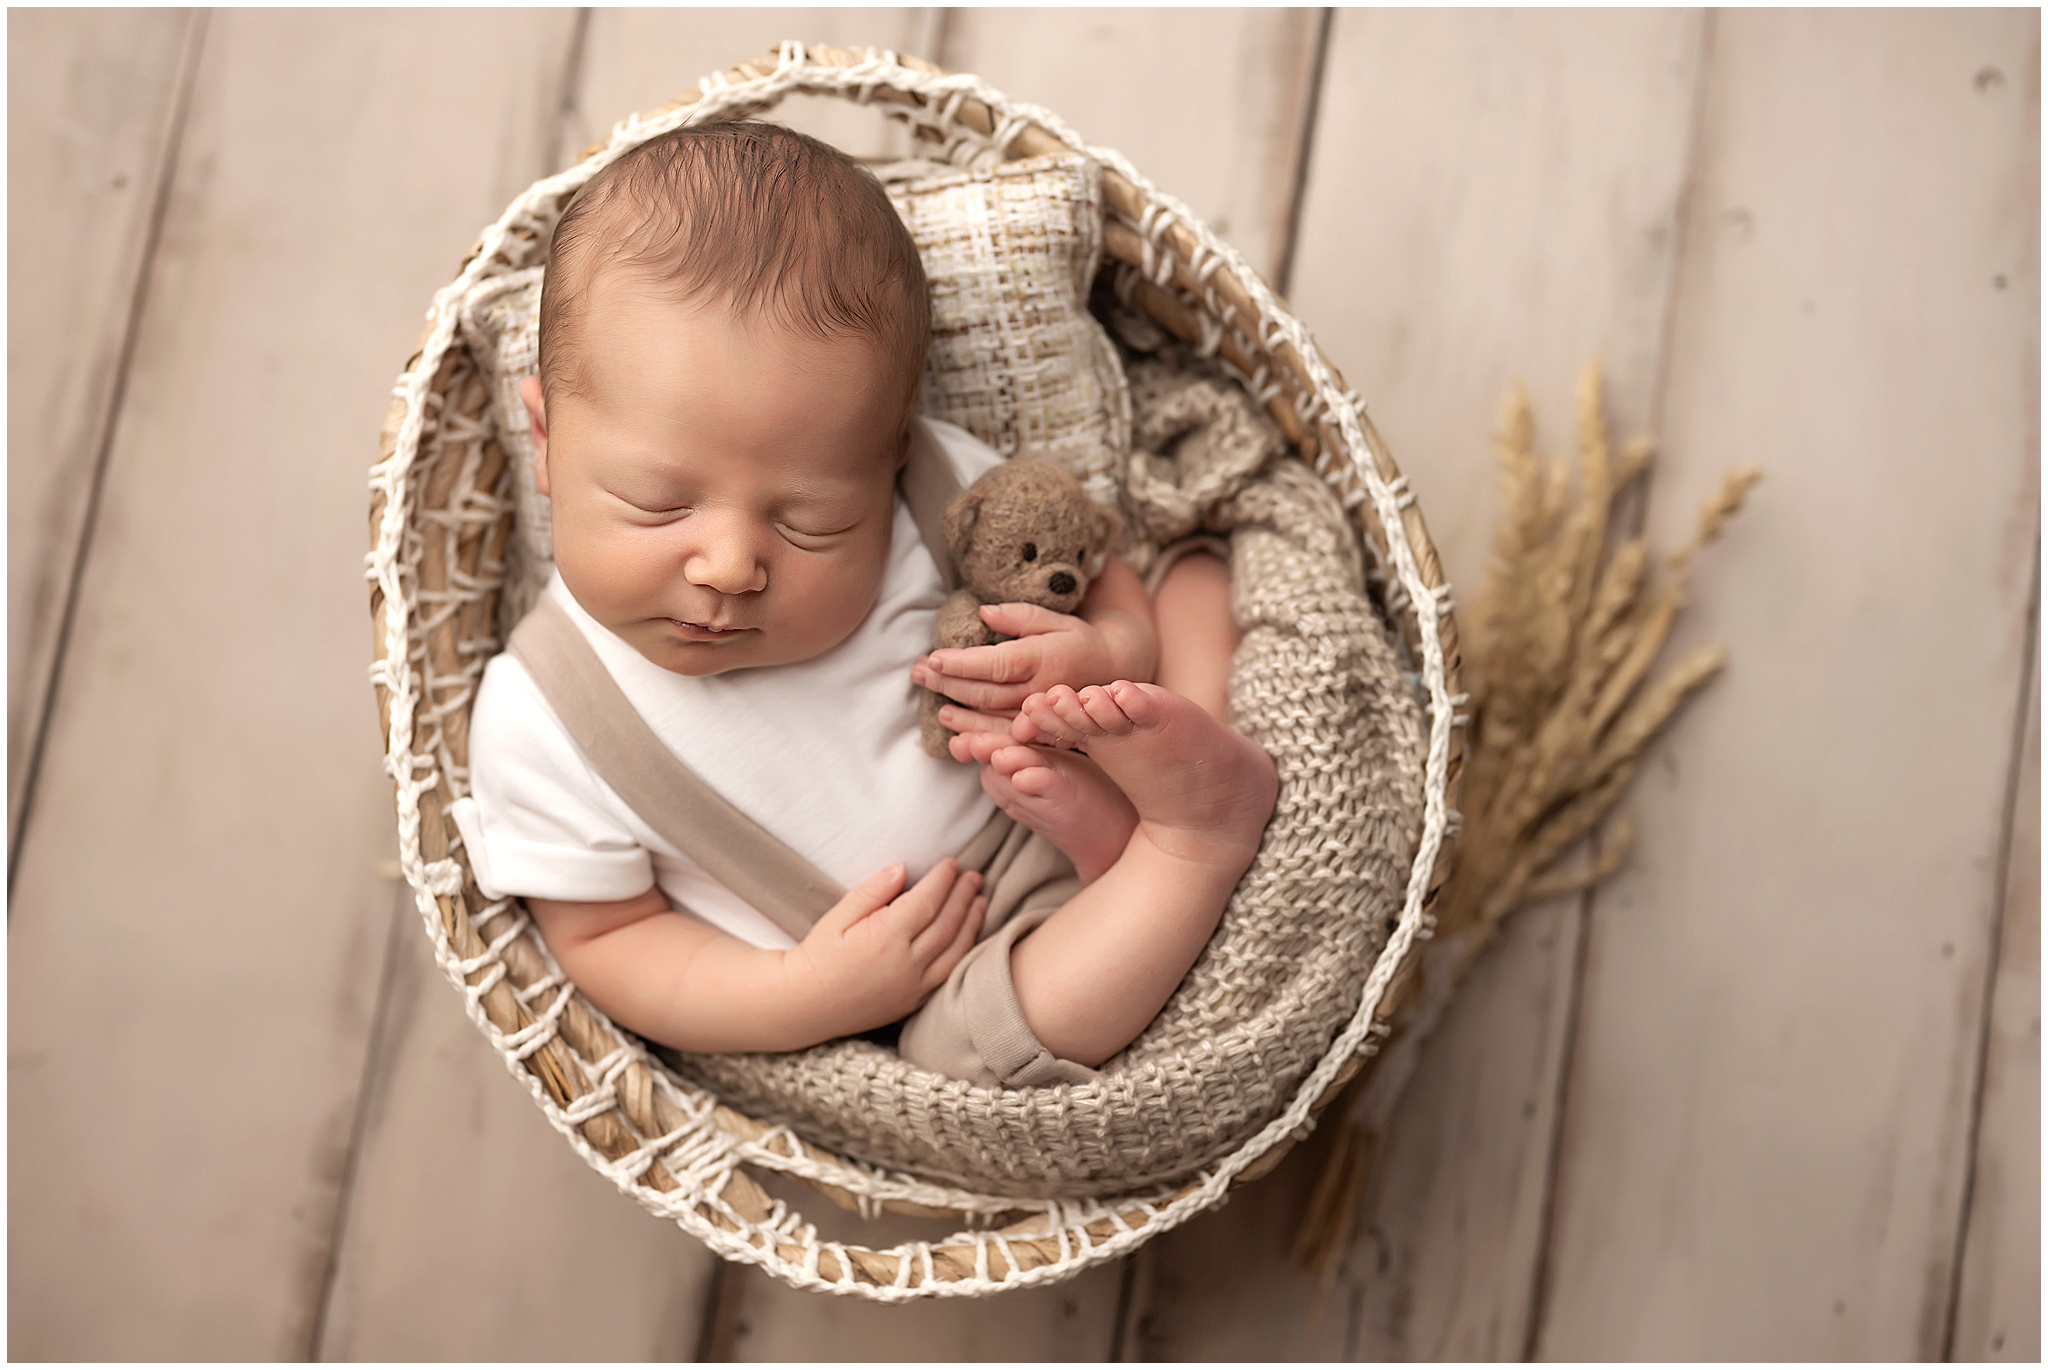 baby boy curled up in basket during newborn session at studio in london, ontario